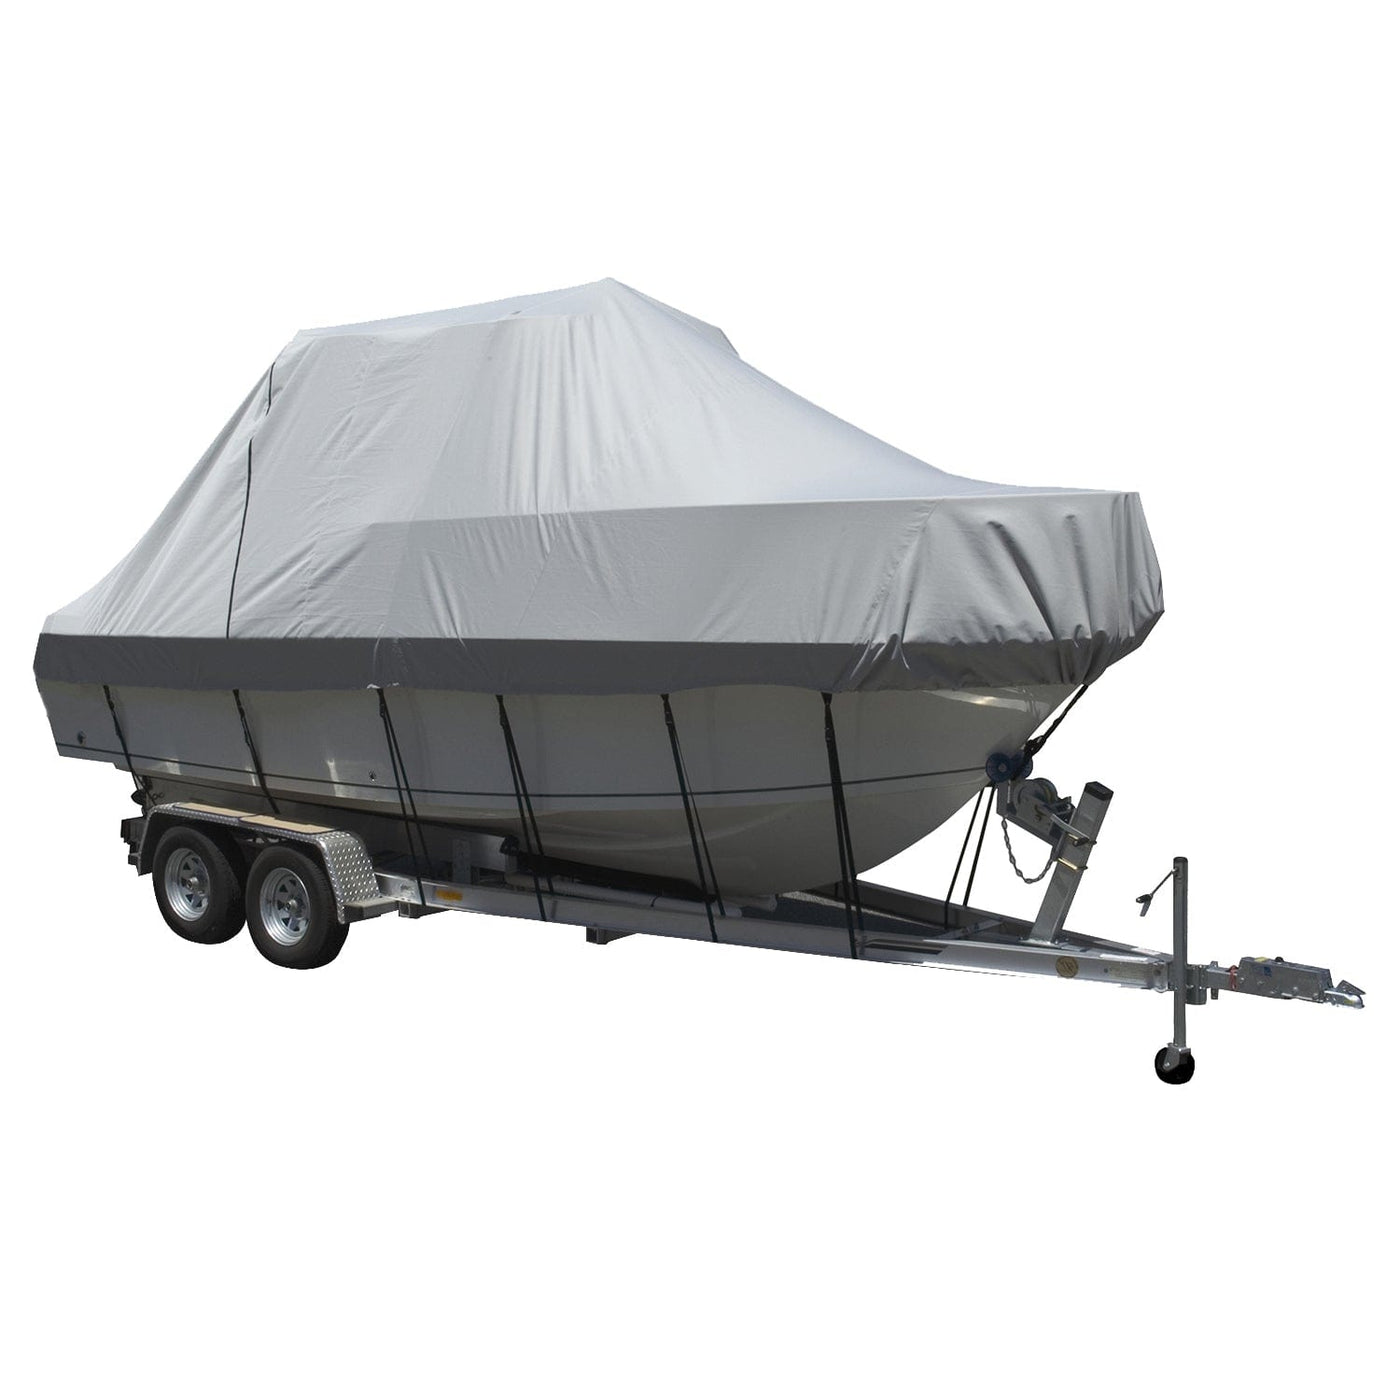 Carver by Covercraft Carver Performance Poly-Guard Specialty Boat Cover f/23.5' Walk Around Cuddy & Center Console Boats - Grey Winterizing